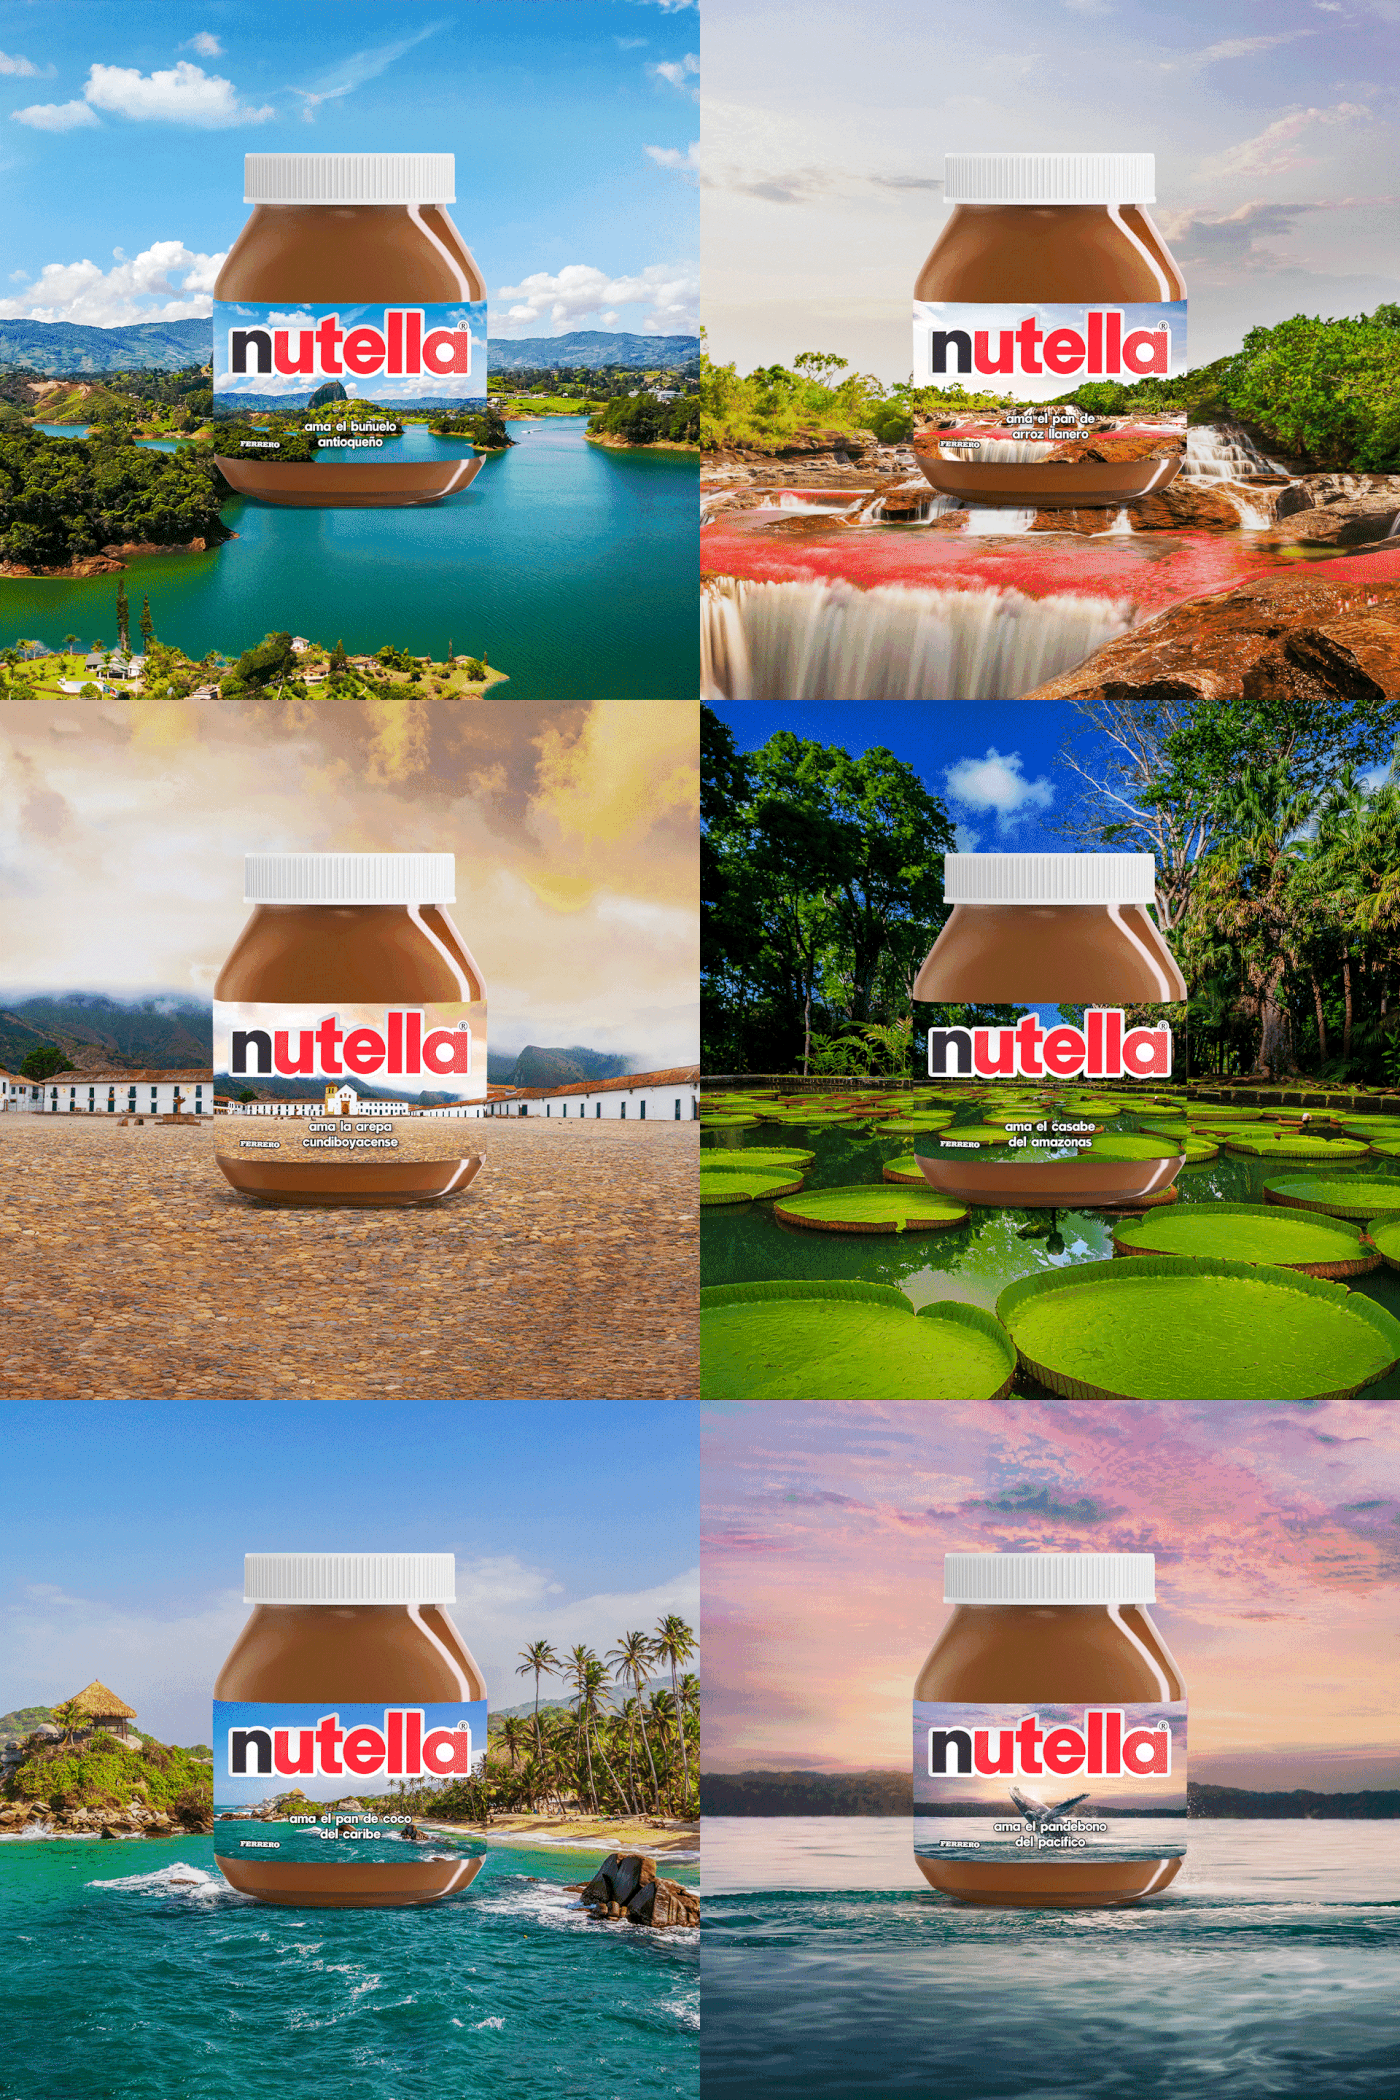 design Advertising  nutella colombia paisaje Photography  ads art direction  creative campaing